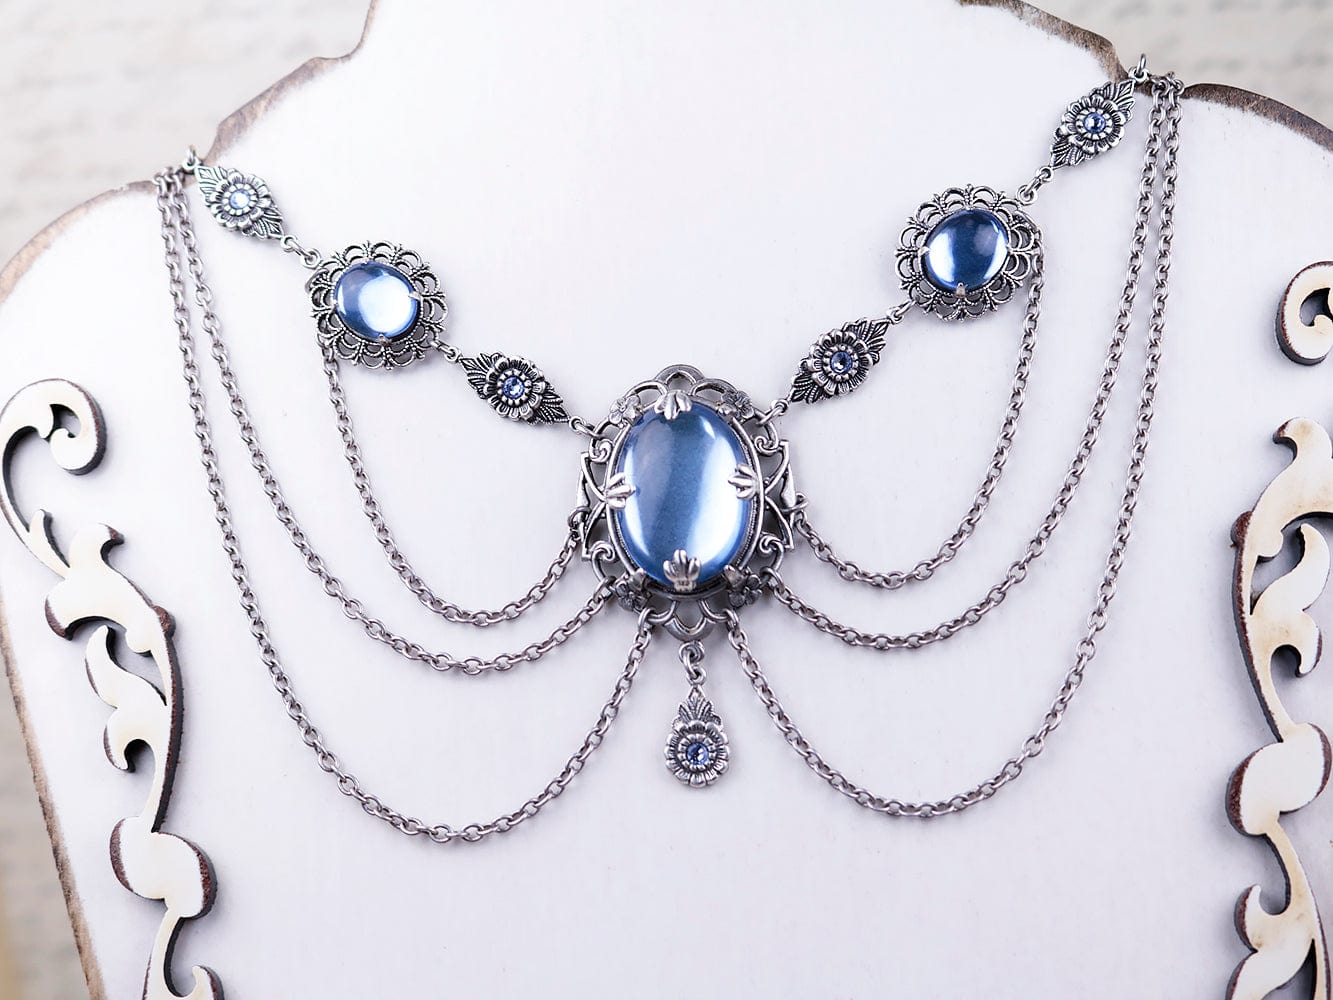 Drucilla Necklace in Light Sapphire and Antiqued Silver by Rabbitwood and Reason